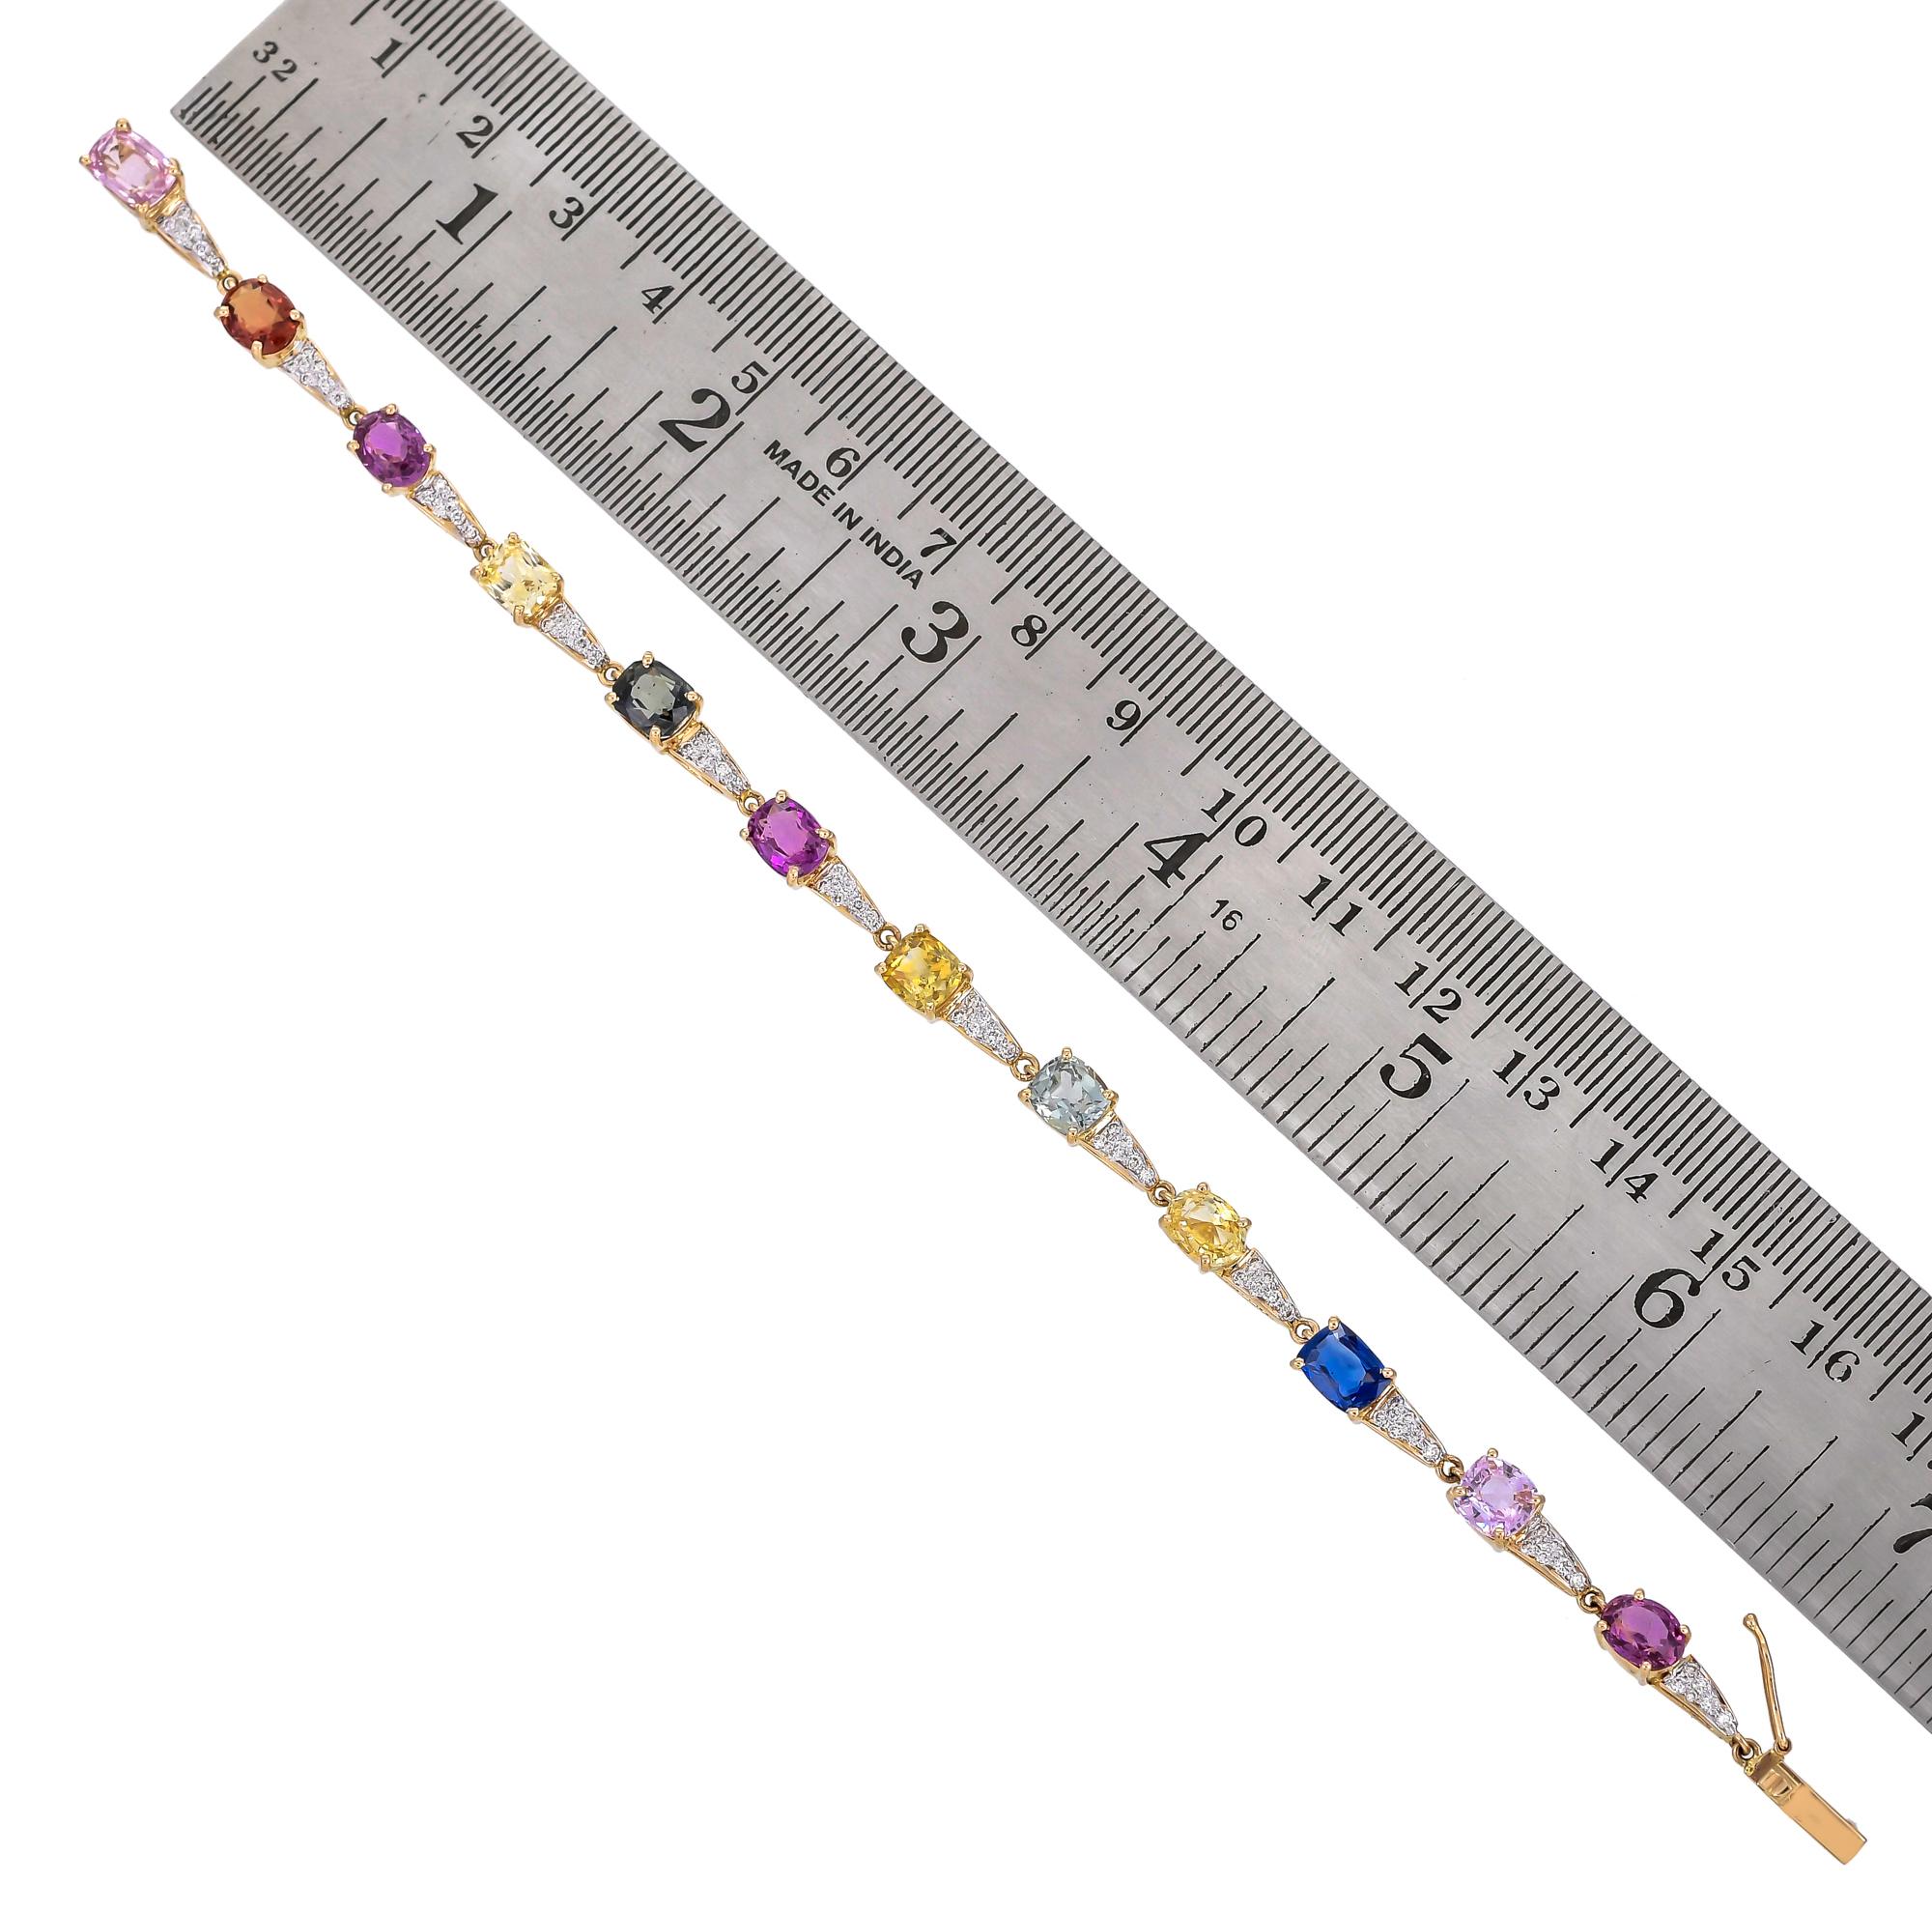 The flexible strap alternately set with 12 oval shaped multi sapphire weighing approximately 13.18 carats, and 72 round diamonds weighing approximately 0.49 carats, mounted in 18 karats yellow gold. A simple yet fashionable bracelet to take you